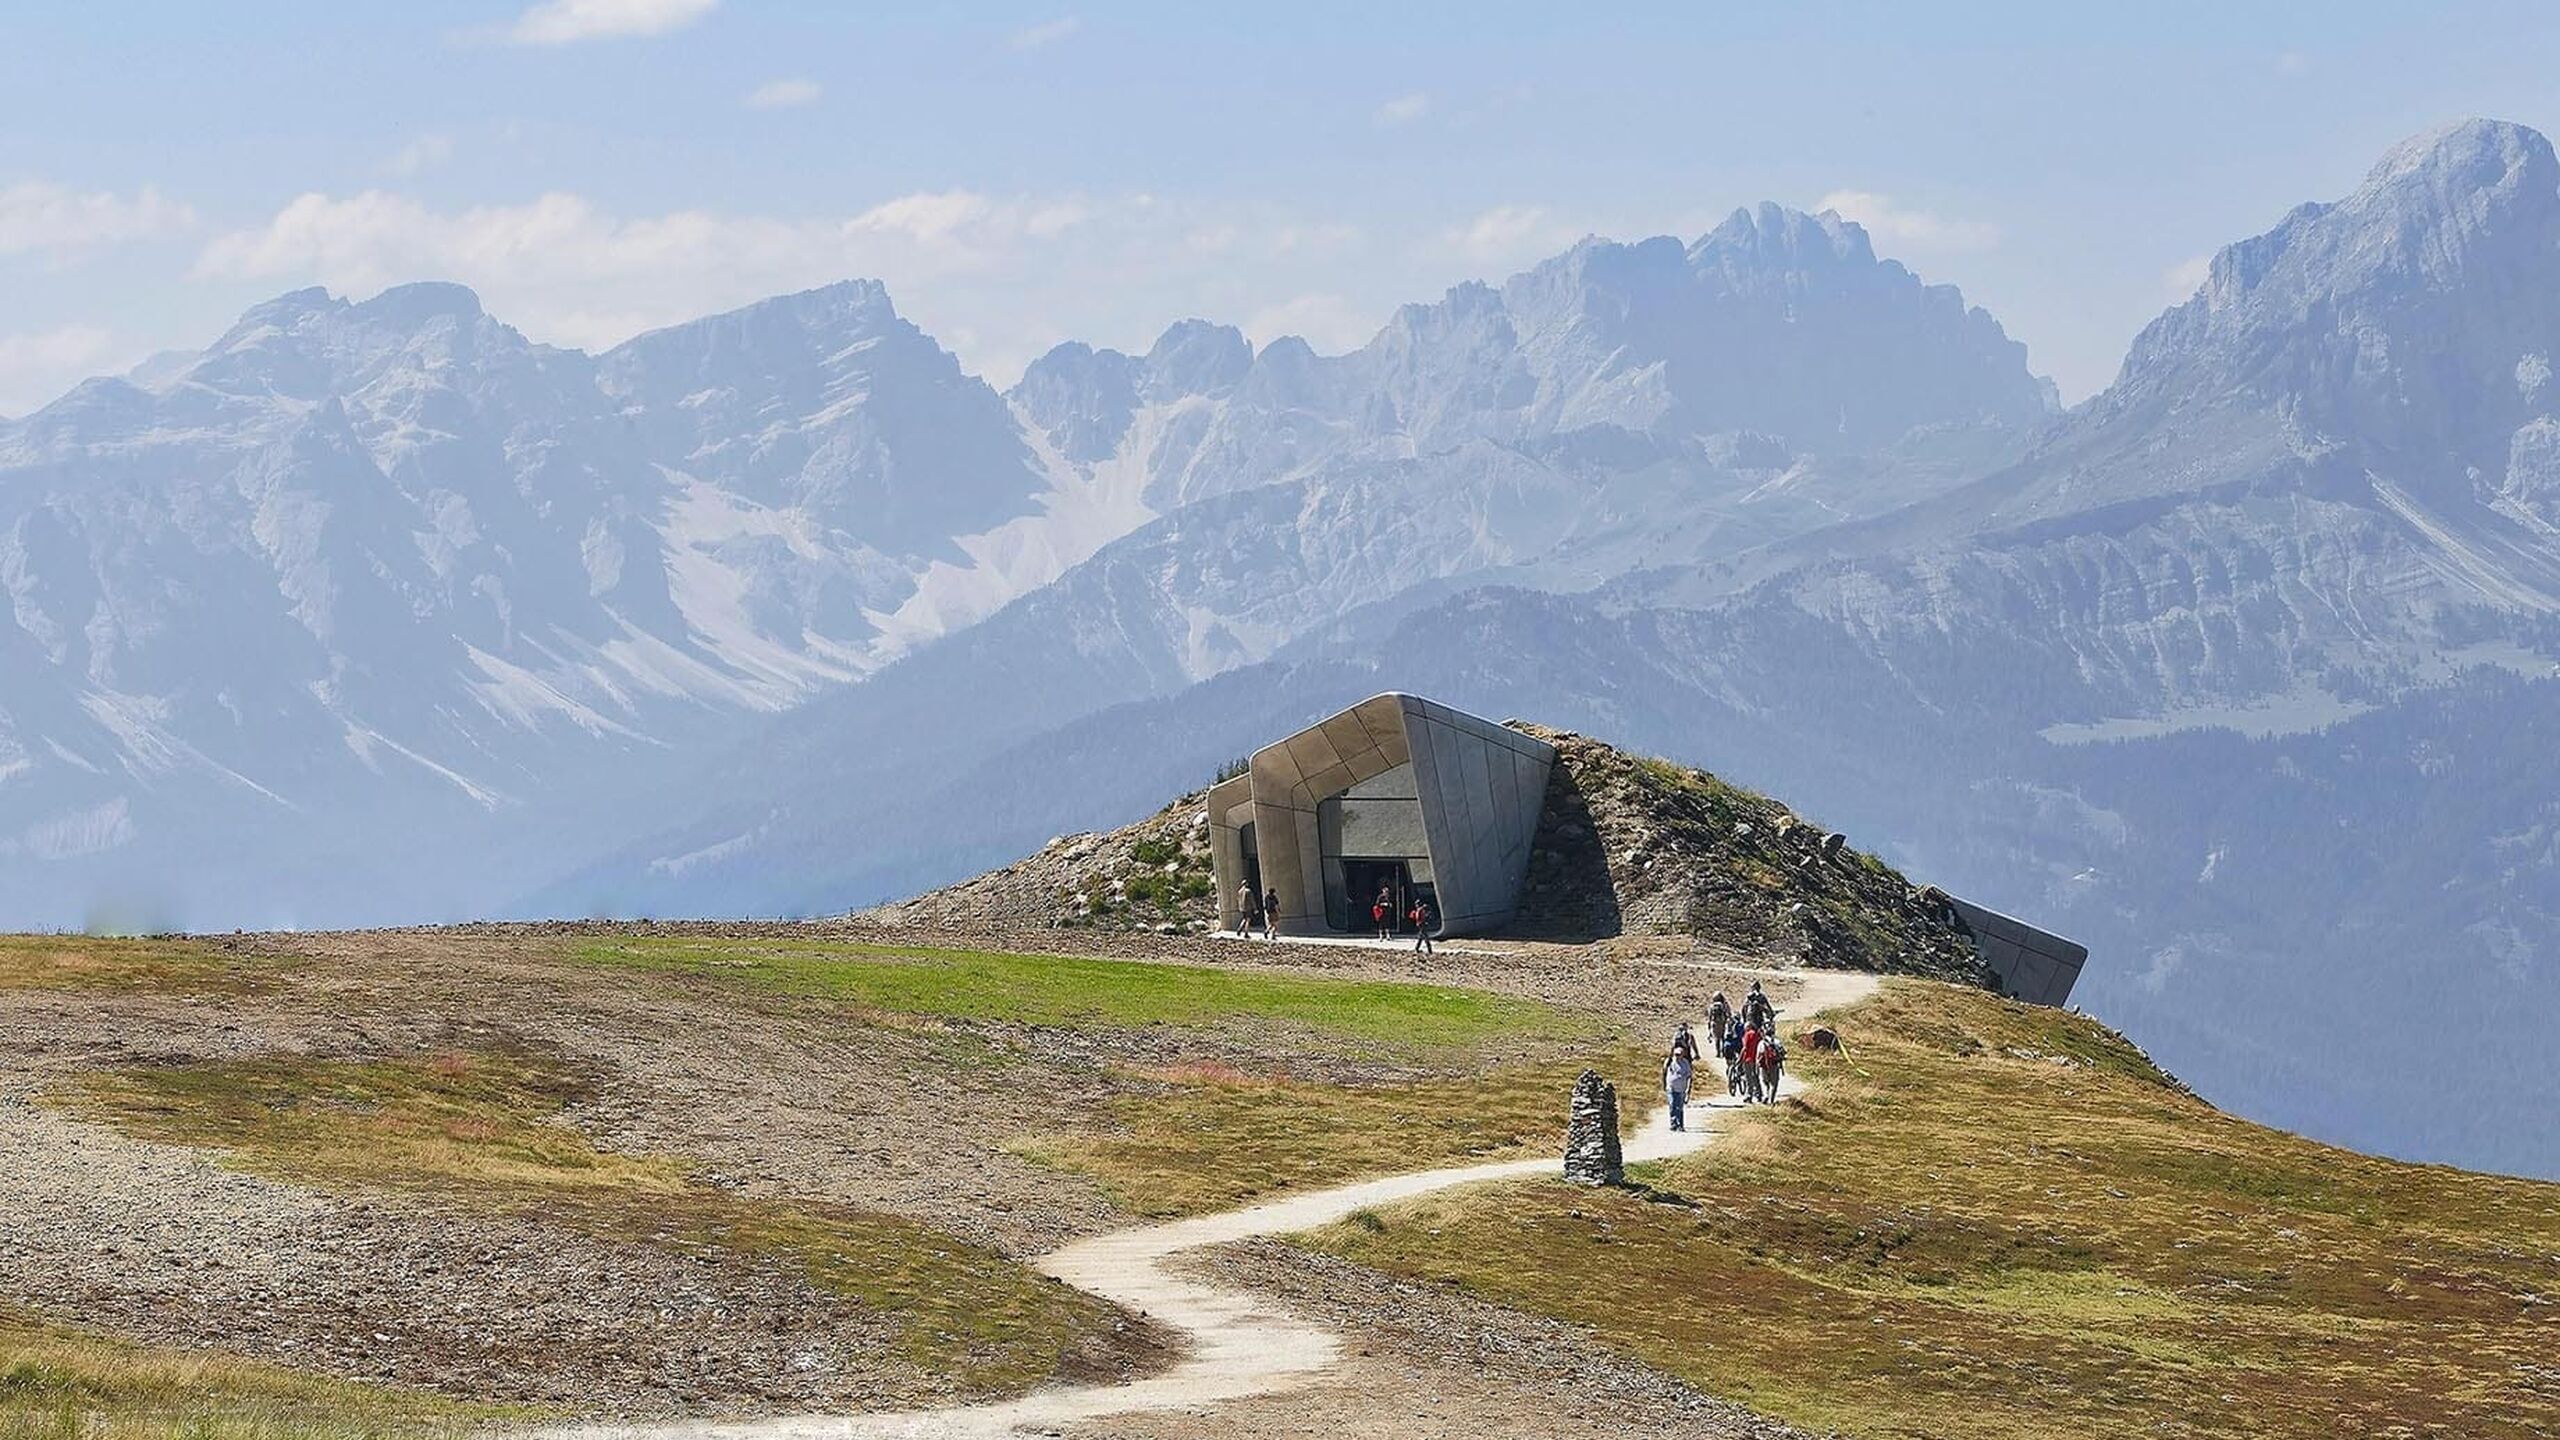 The Messner Mountain Museum, led by mountaineer Reinhold Messner, showcases mountaineering's rich history and culture.